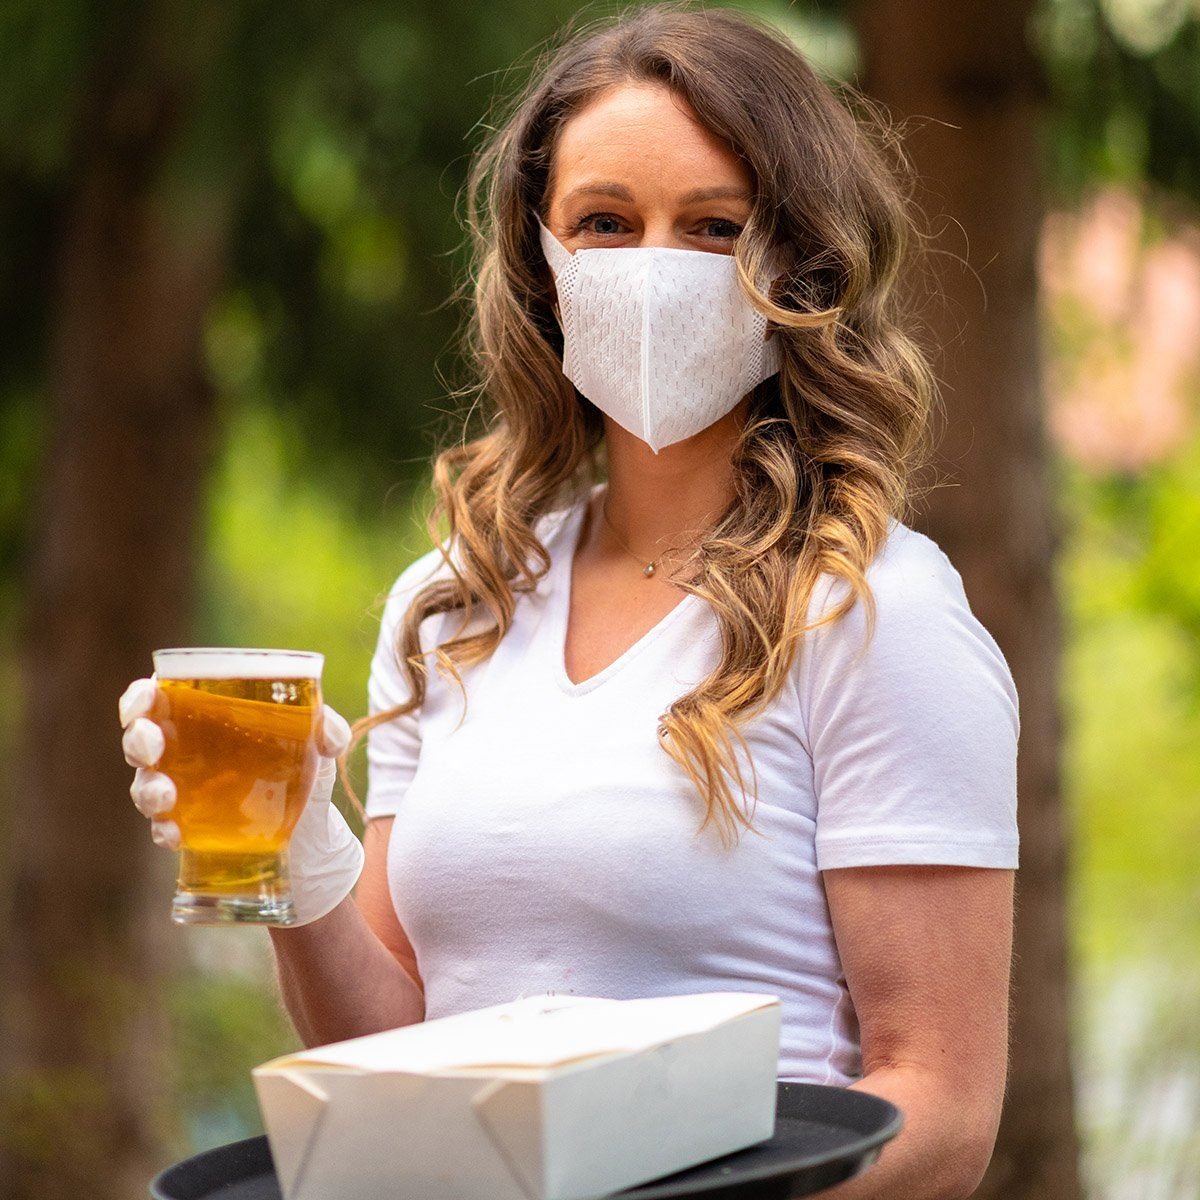 Server wearing a face mask to prevent the spread of COVID-19